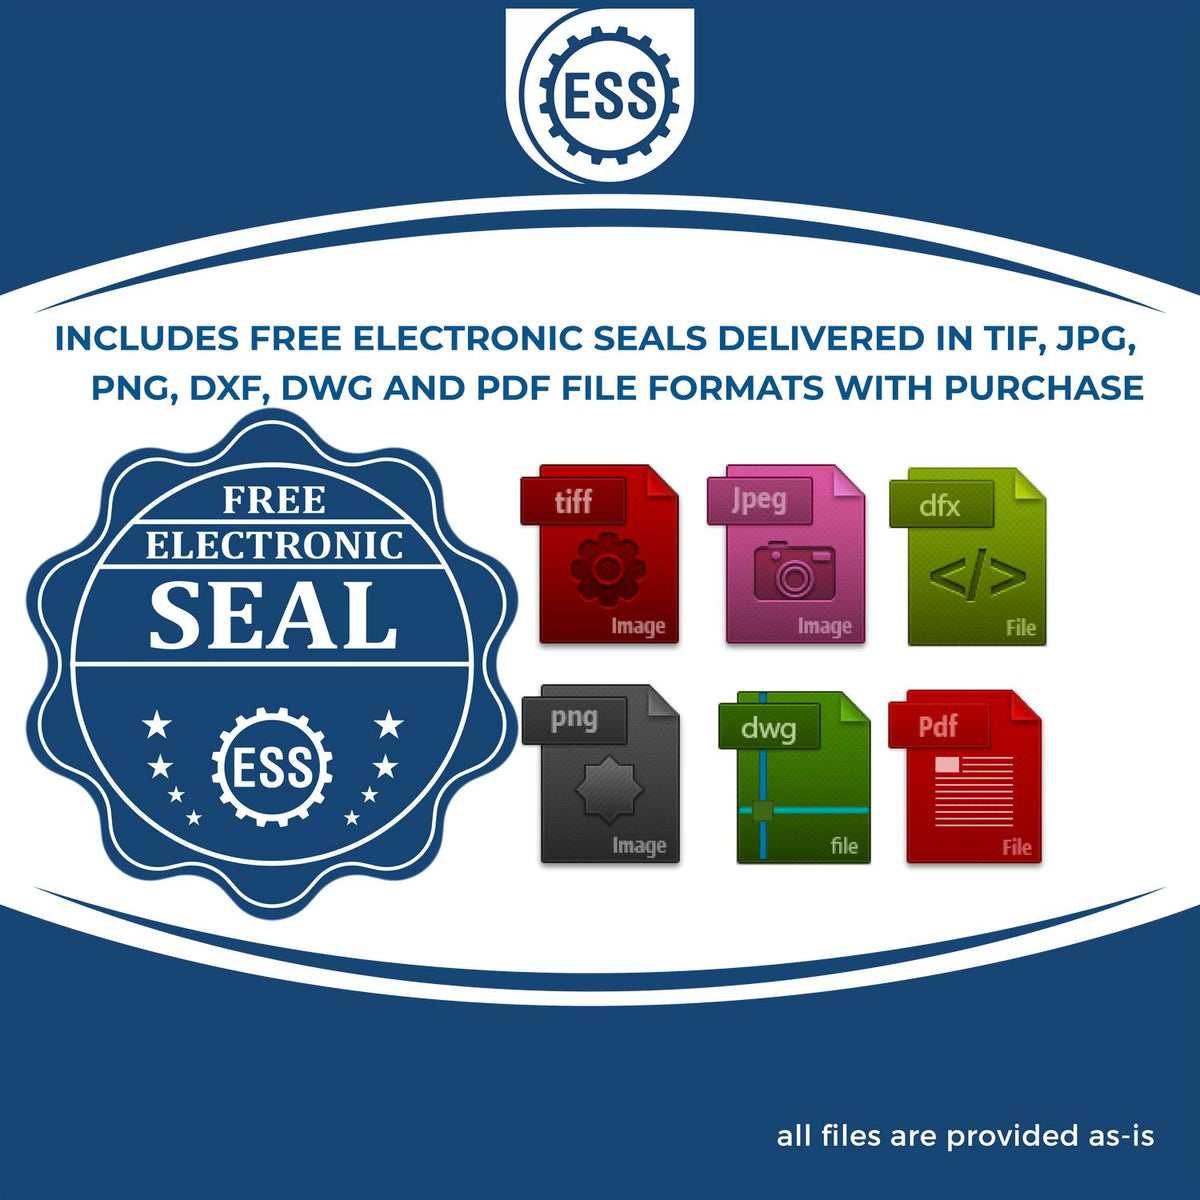 An infographic for the free electronic seal for the Colorado Desk Architect Embossing Seal illustrating the different file type icons such as DXF, DWG, TIF, JPG and PNG.